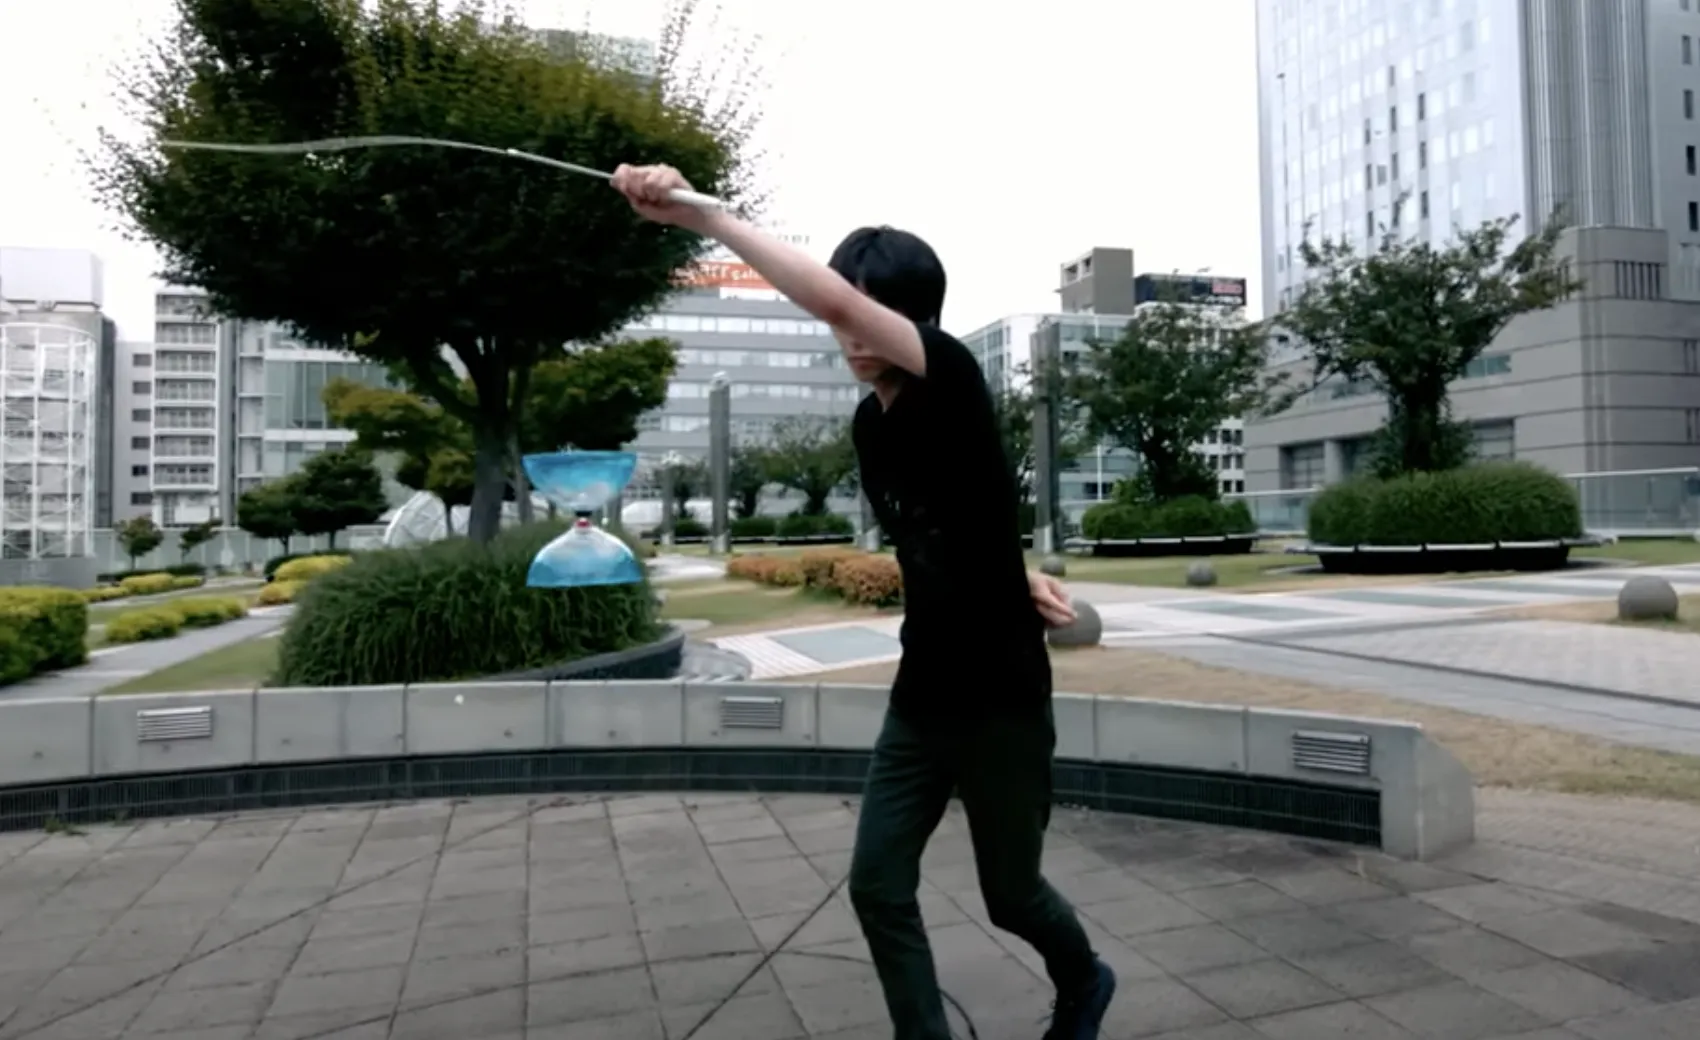 man performing doabolo trick where the diabolo is spinning with no string